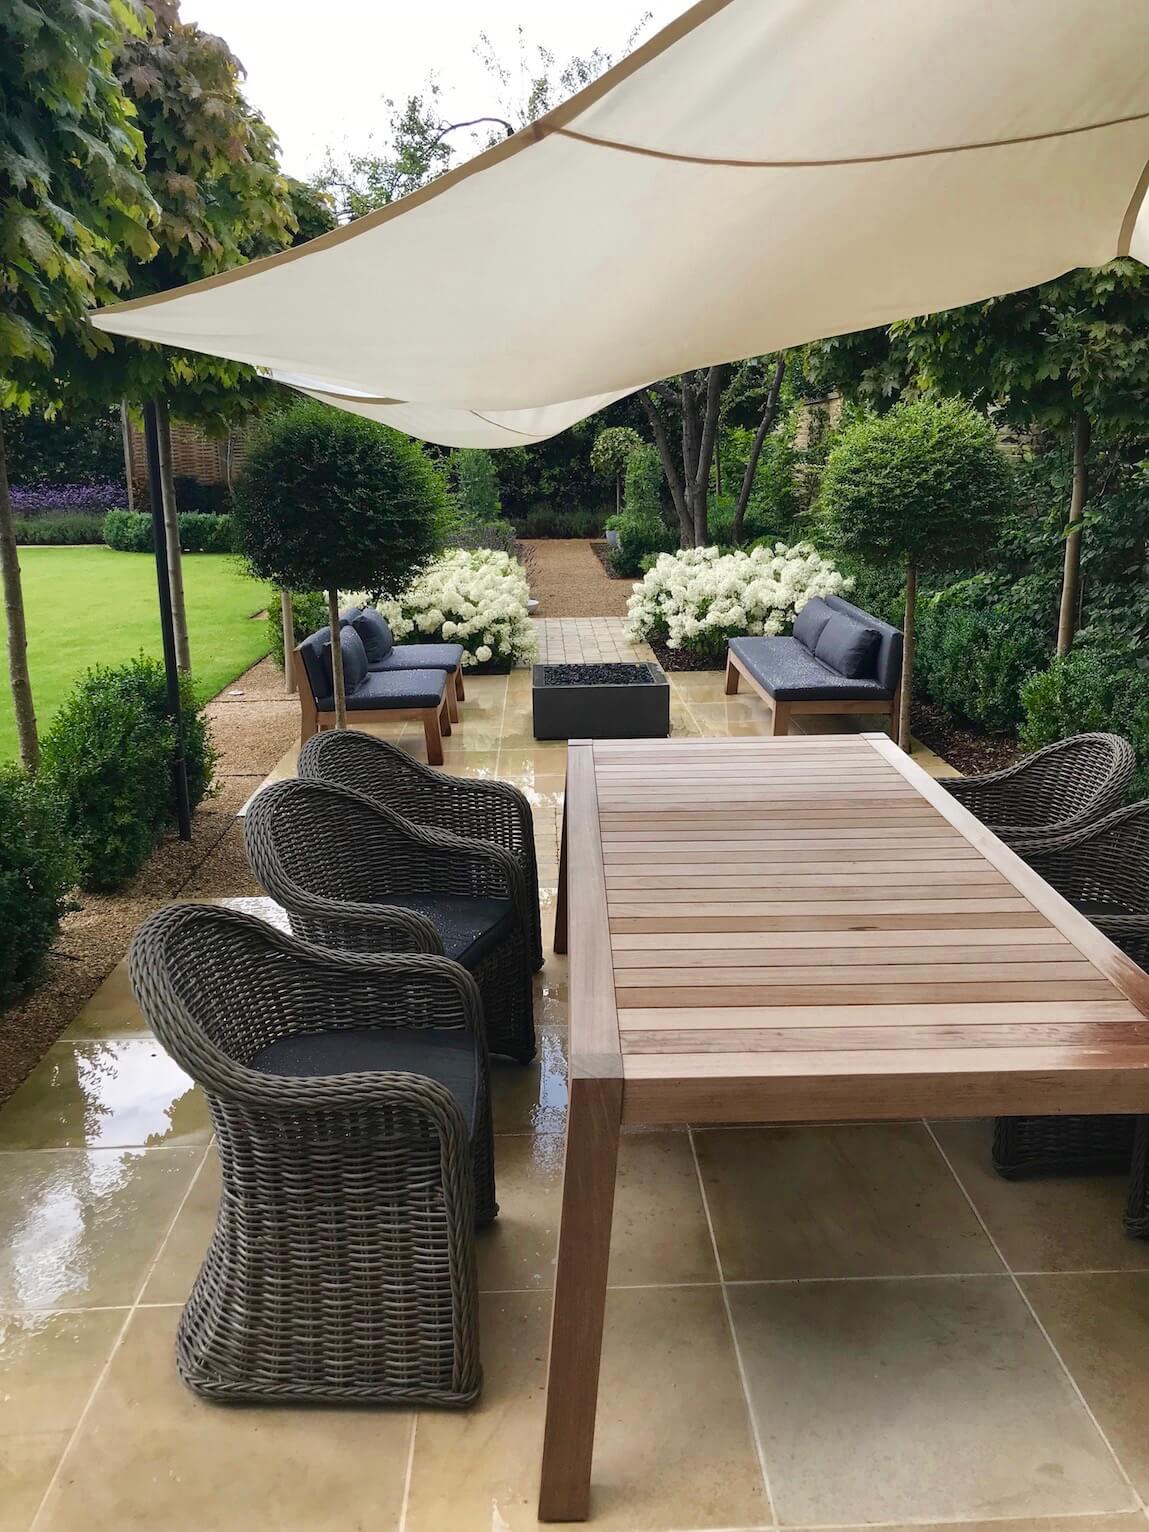 townhouse garden in Oxford shade sail weather protection over dining area